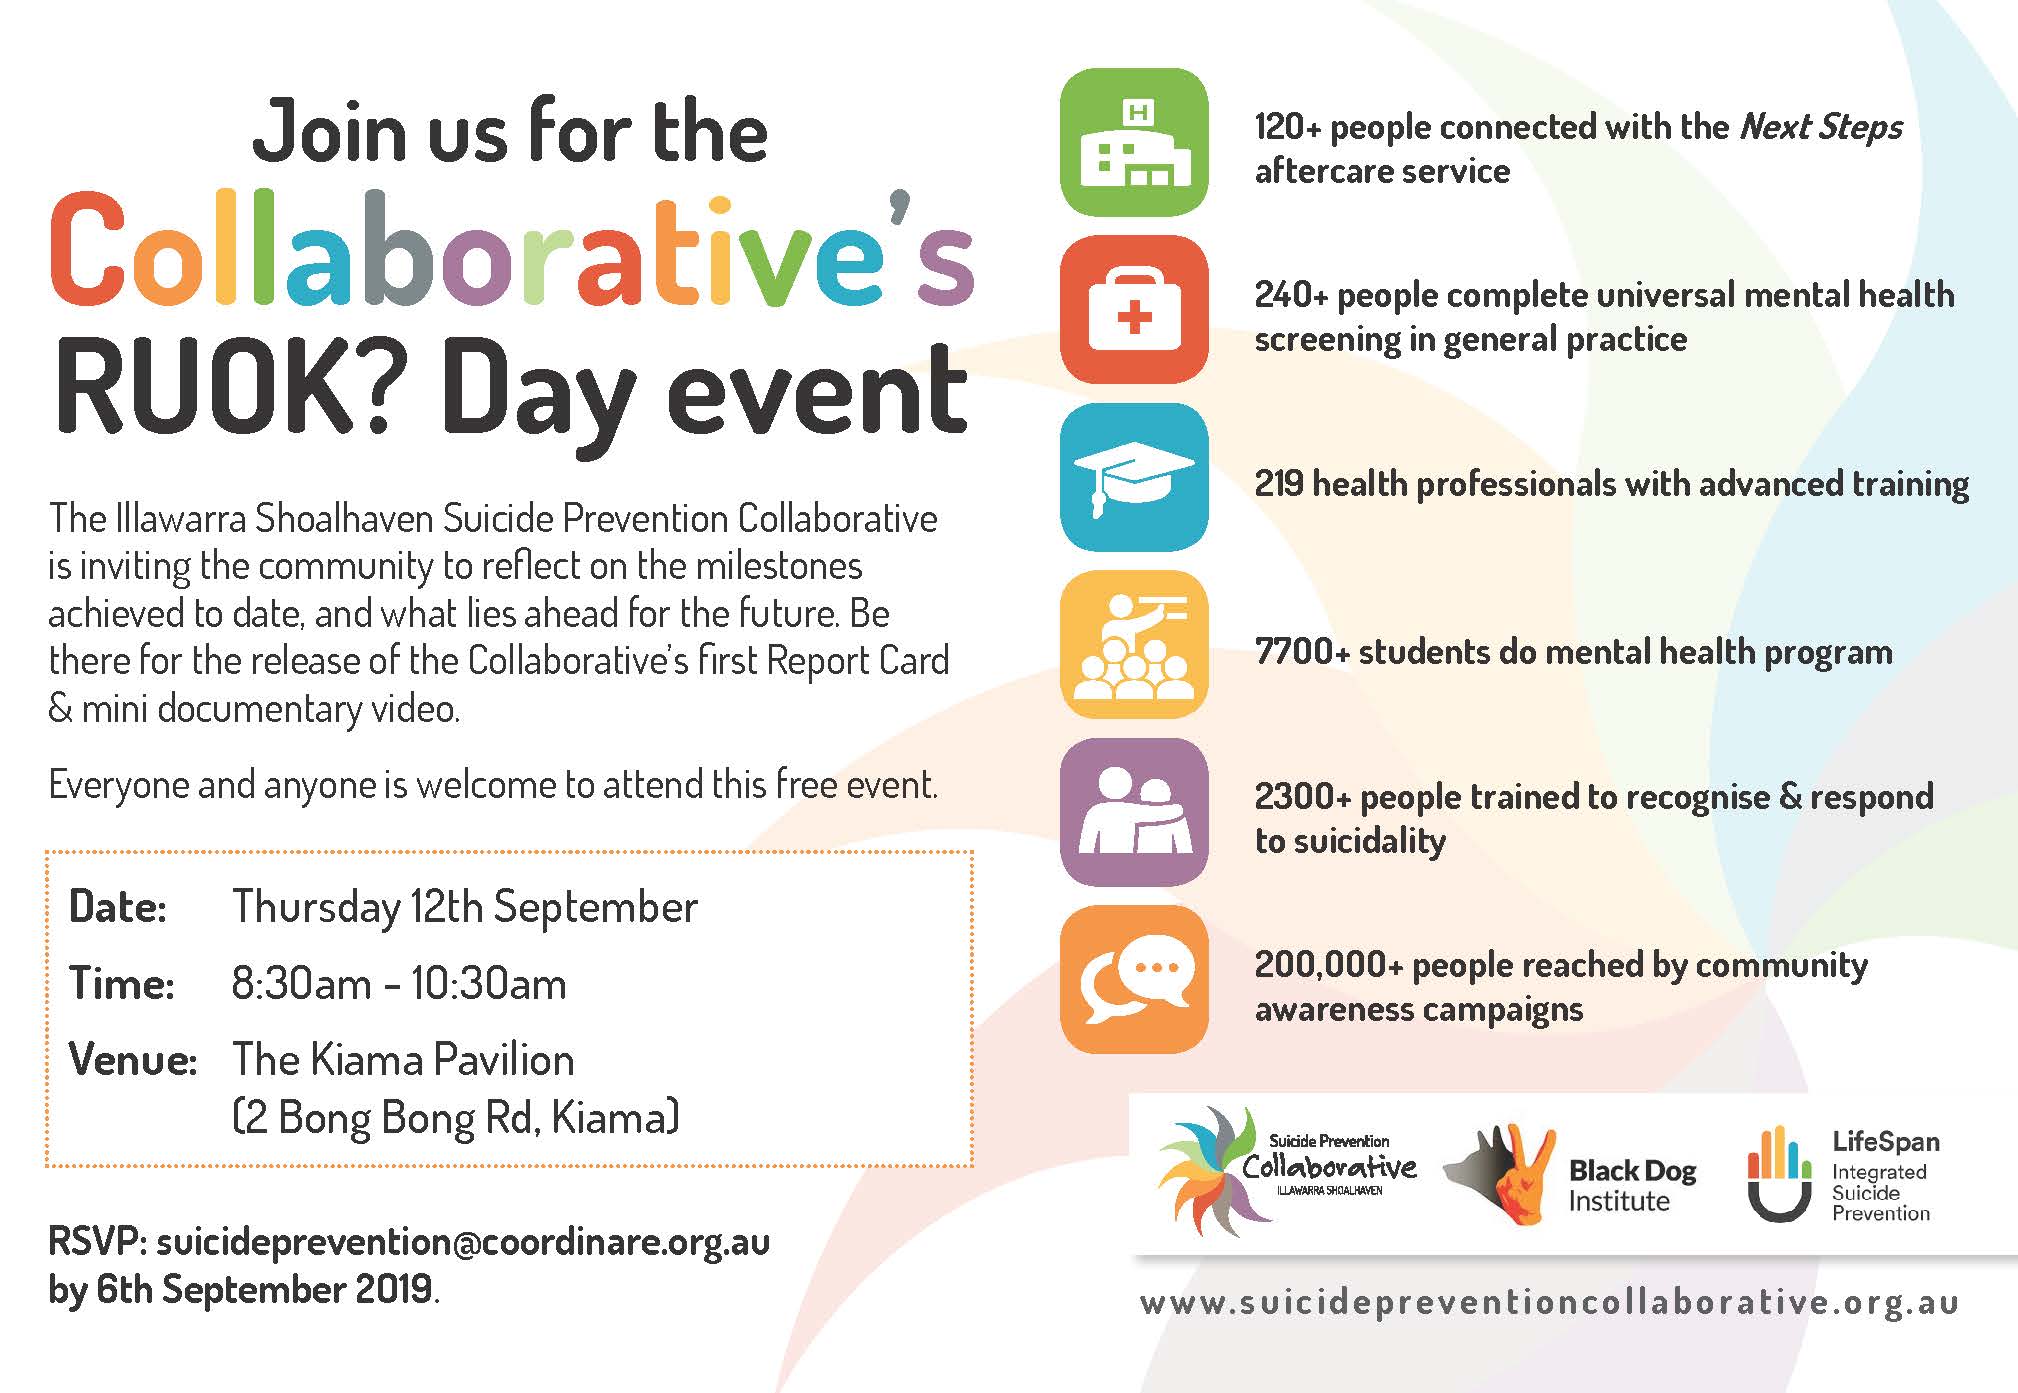 Come along to the Collaborative's R U OK? Day event!